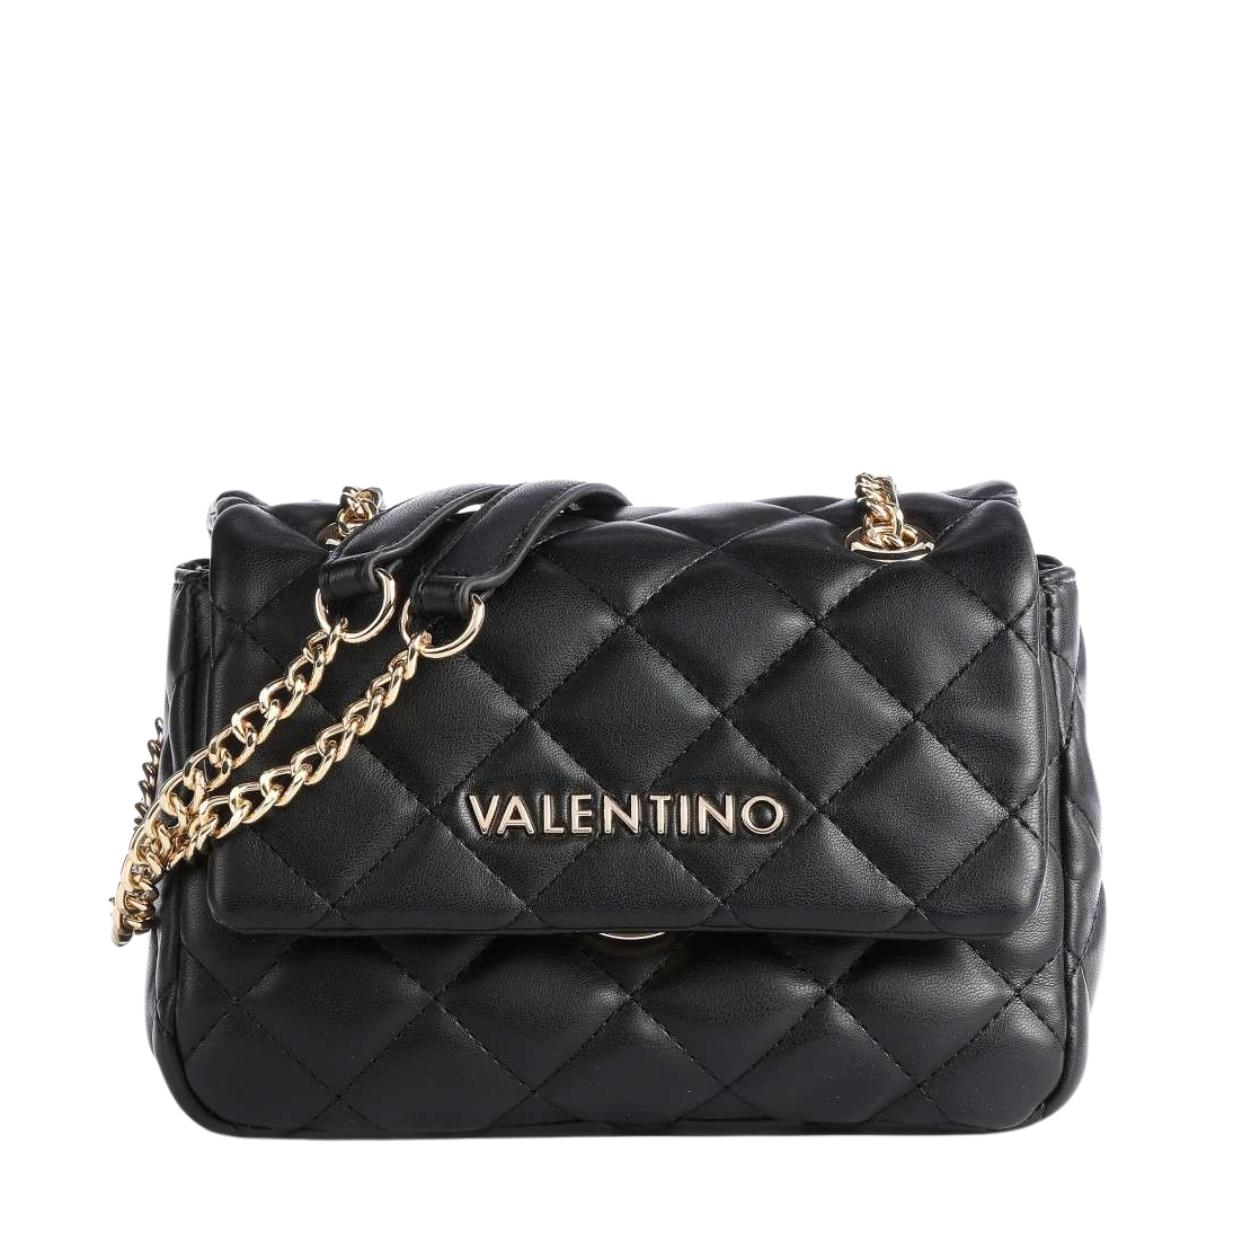 Valentino Bags Bags (100+ products) find at Klarna »